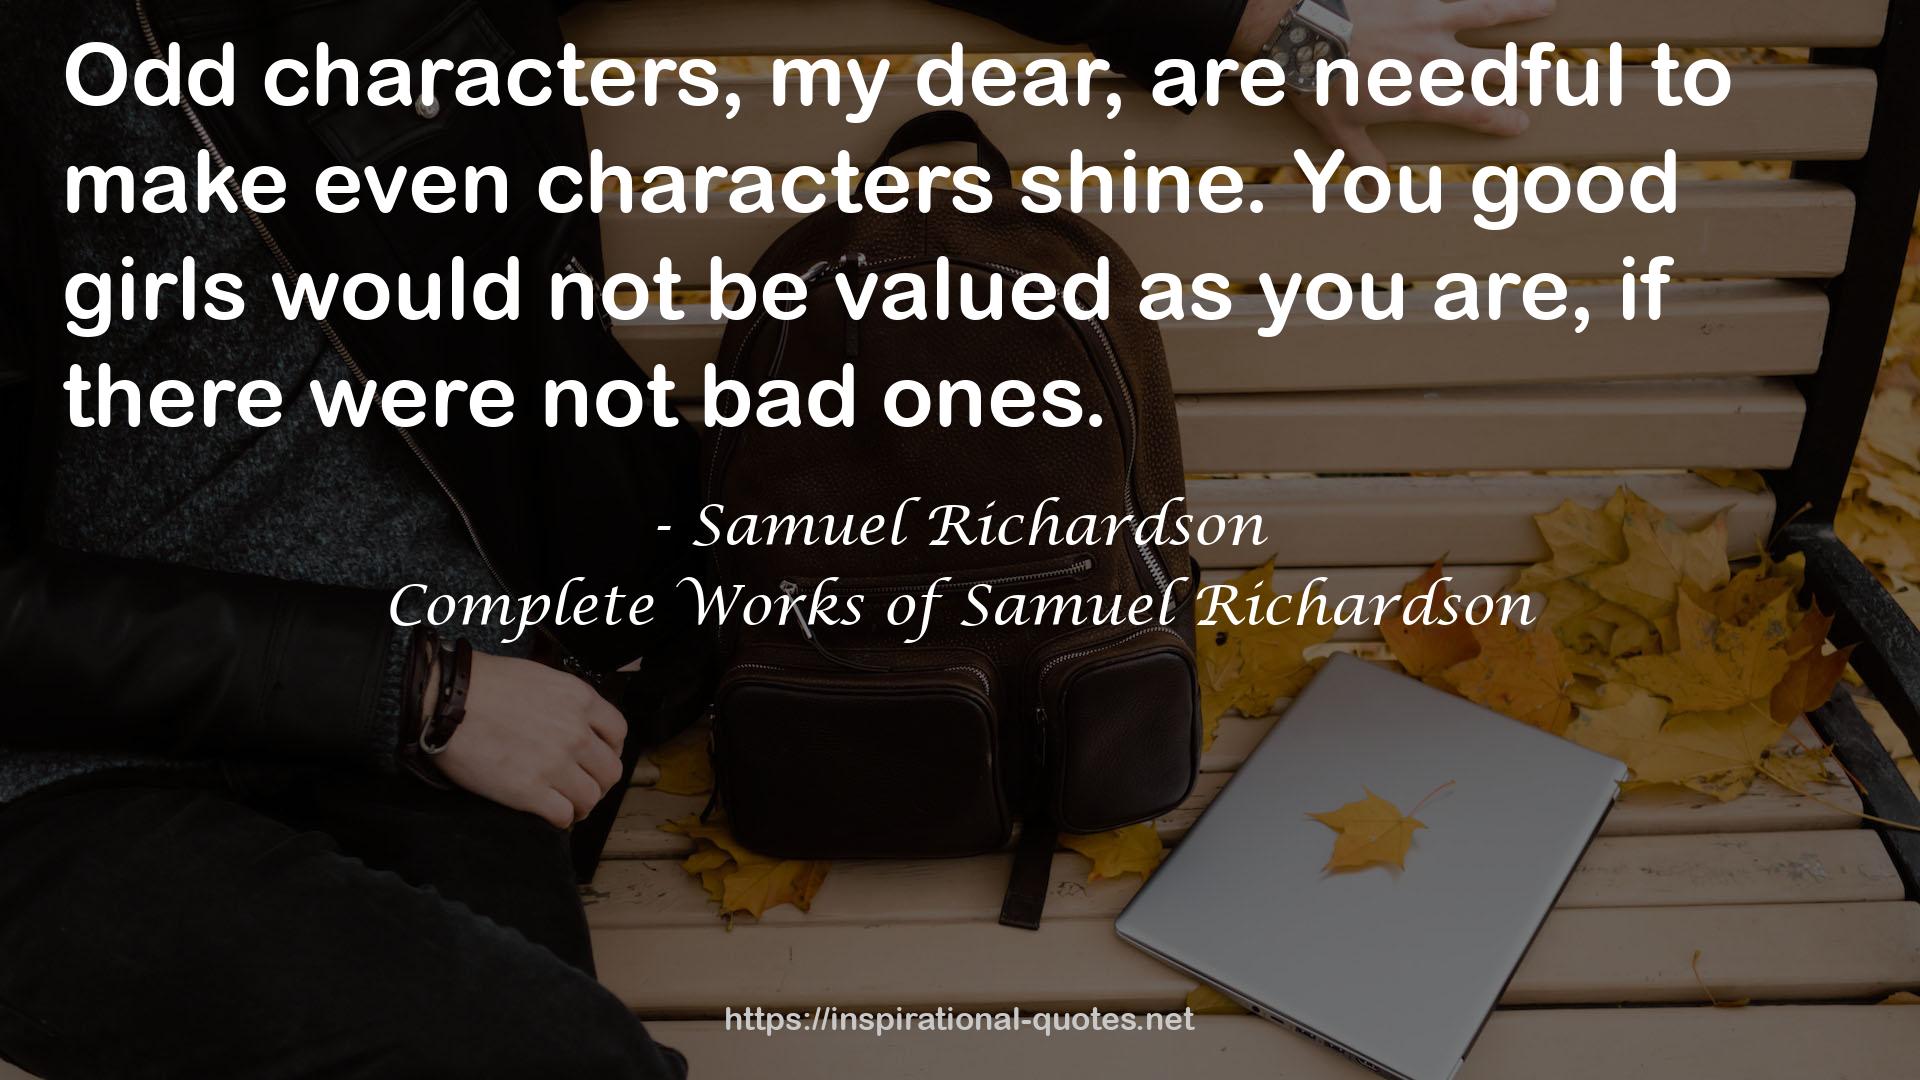 Complete Works of Samuel Richardson QUOTES